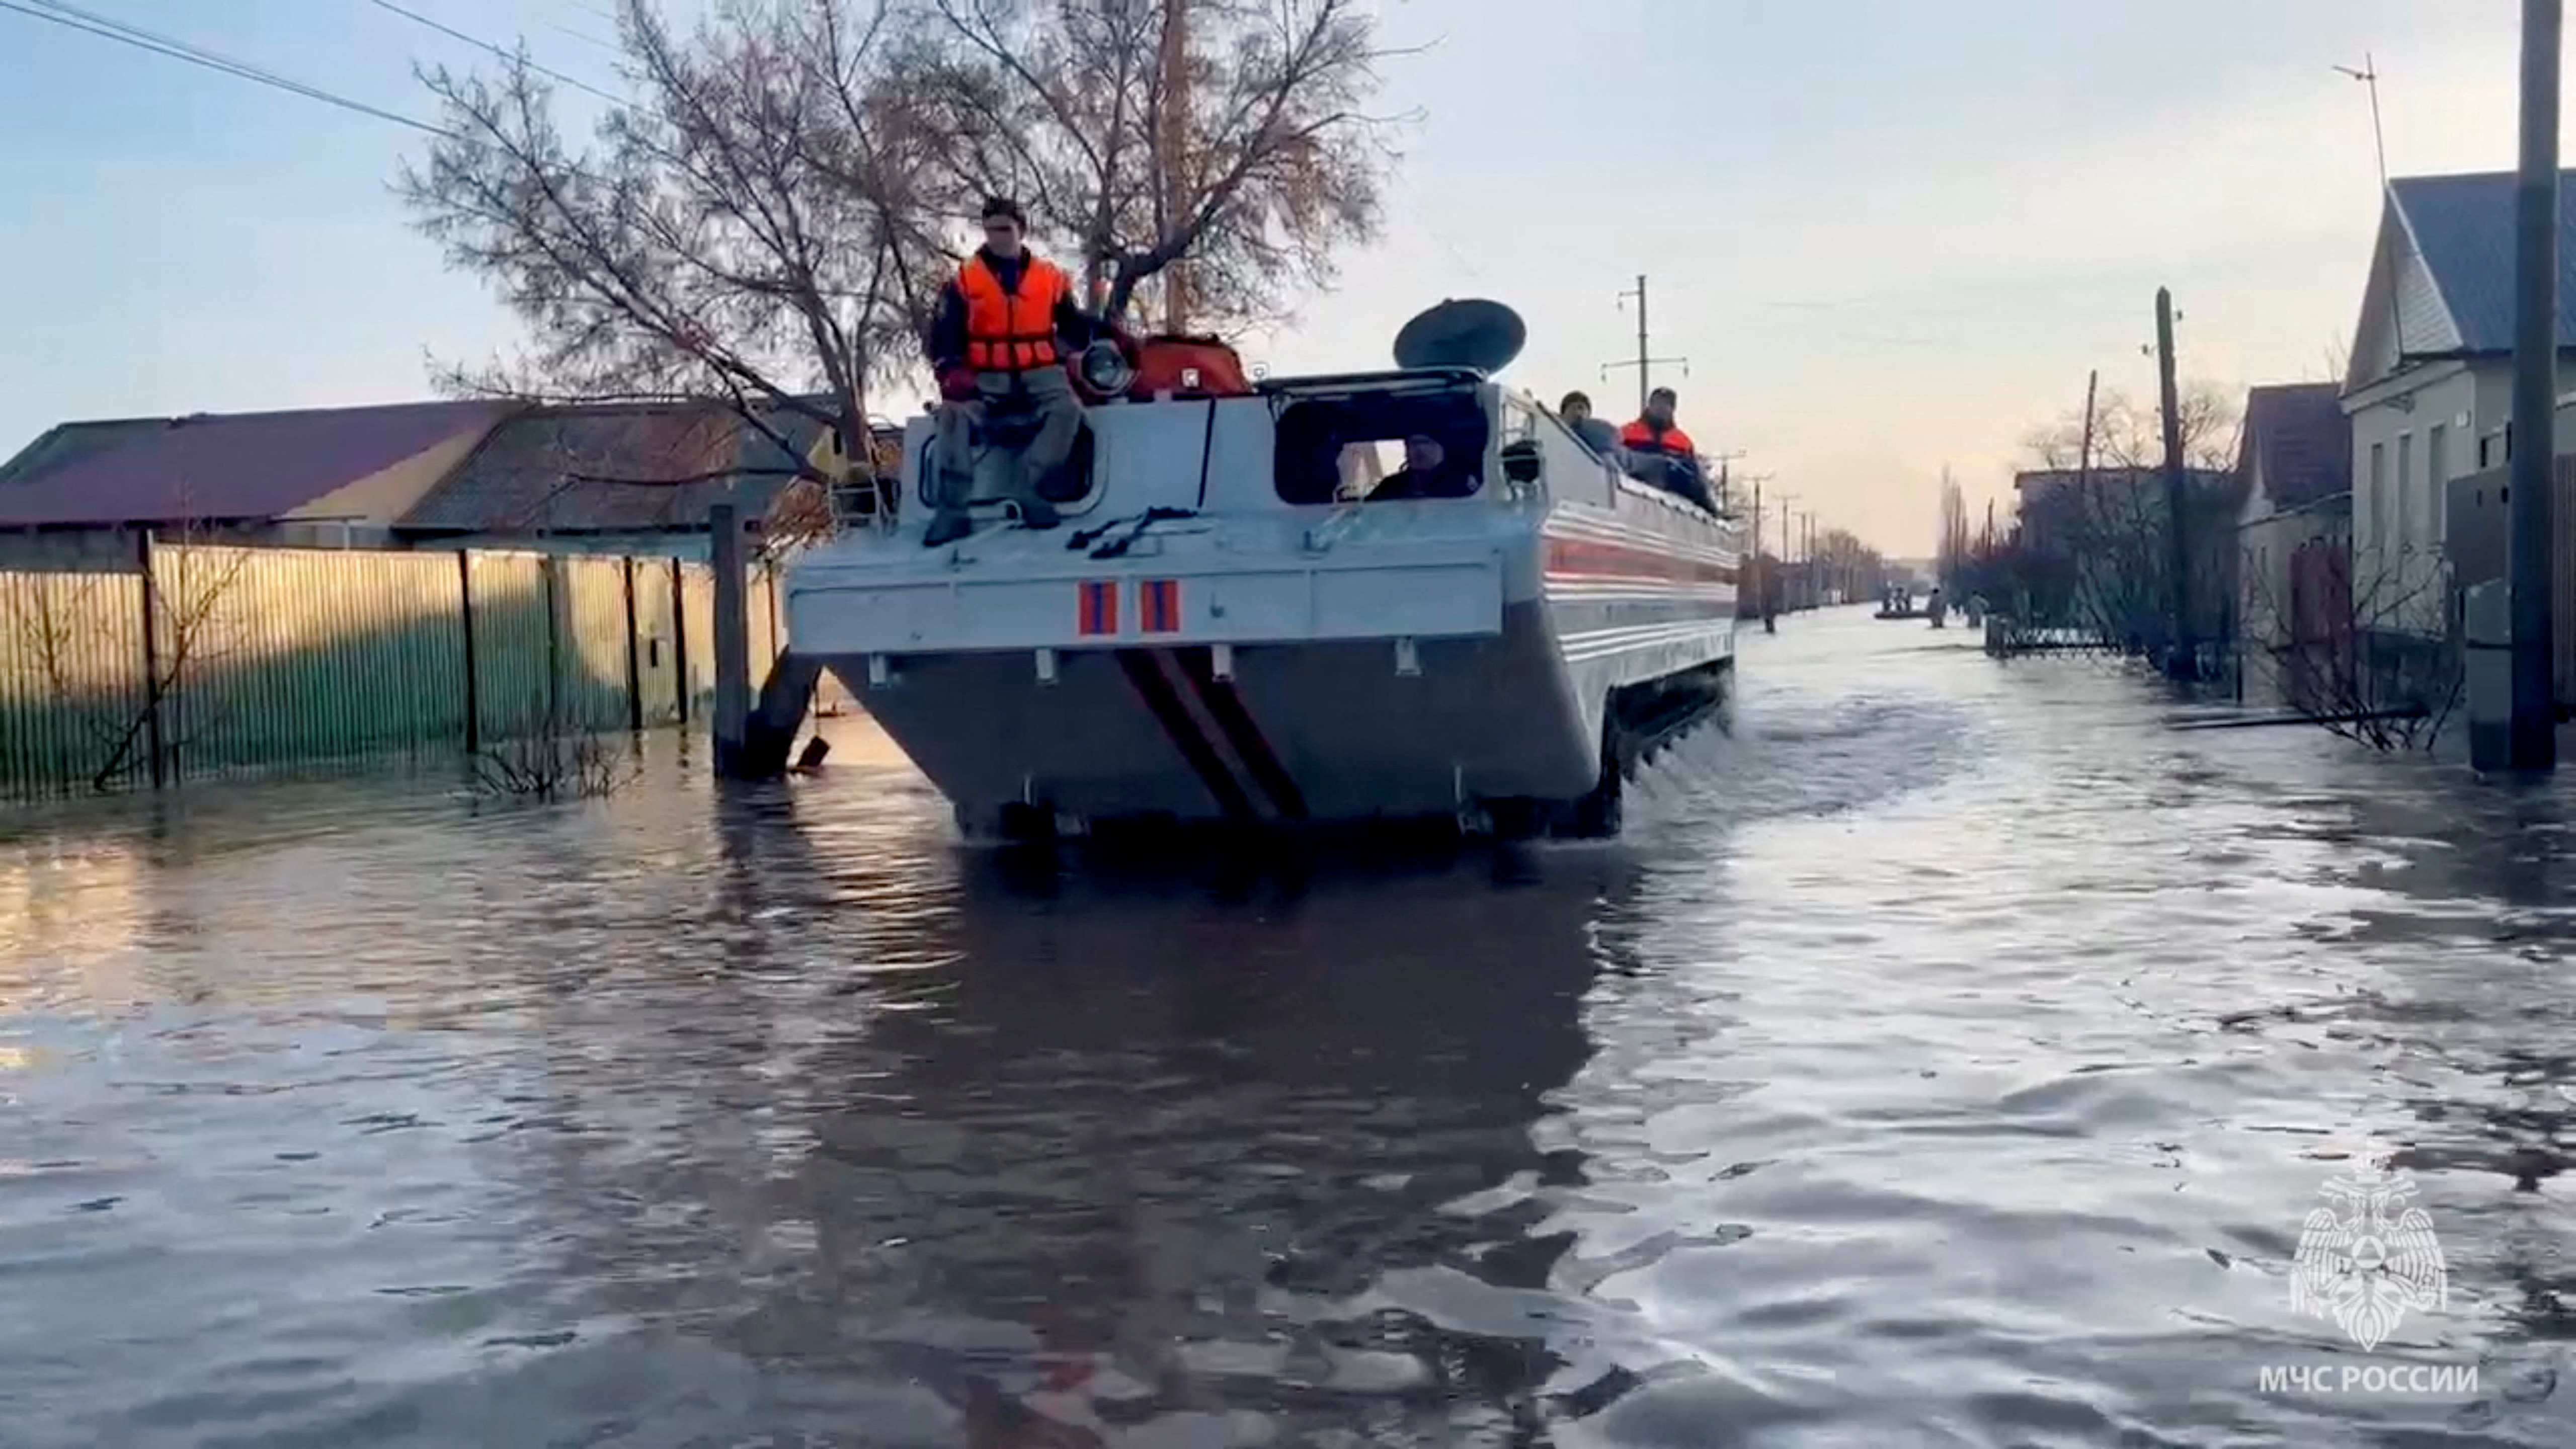 Evacuation from homes in flood-hit Orsk